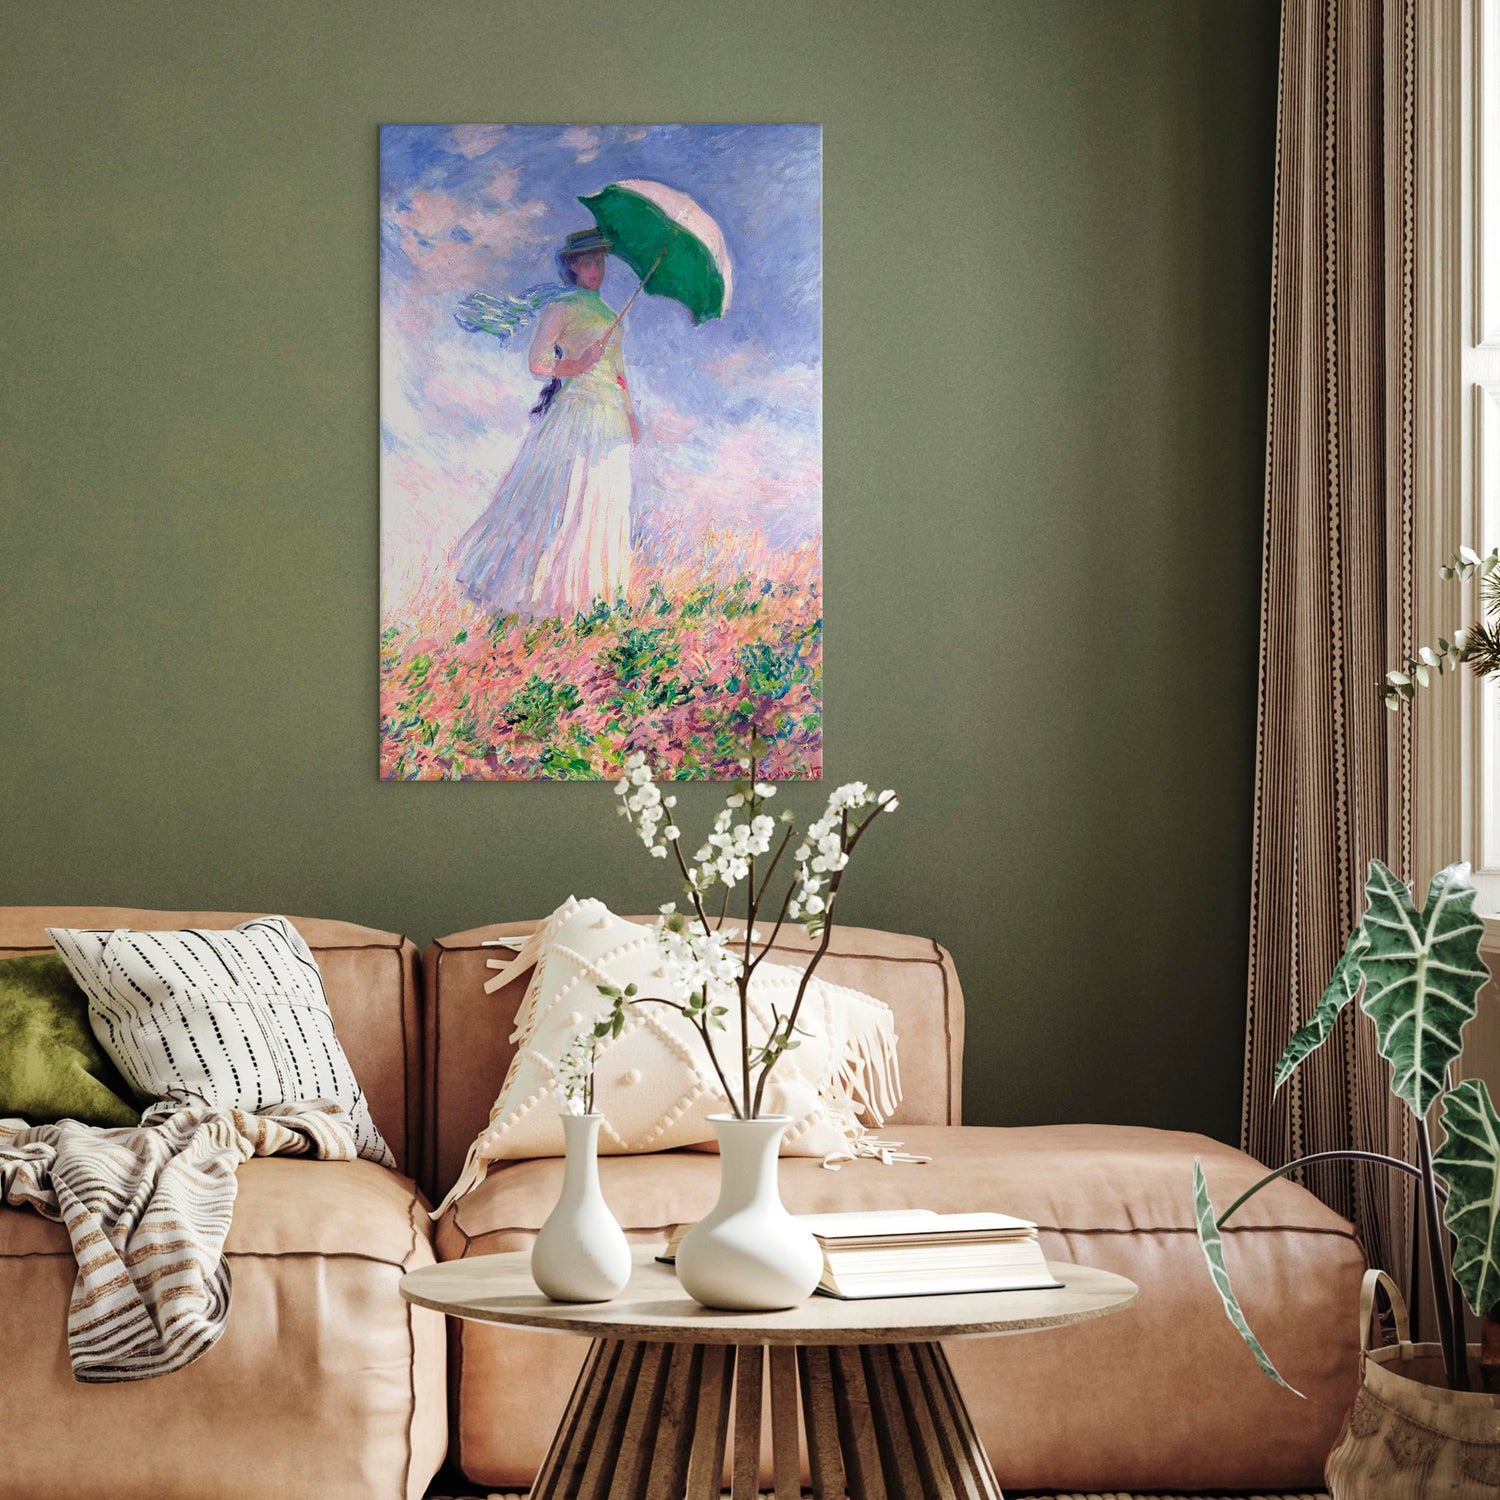 Reproduction Canvas Wall Art - Woman With Parasol